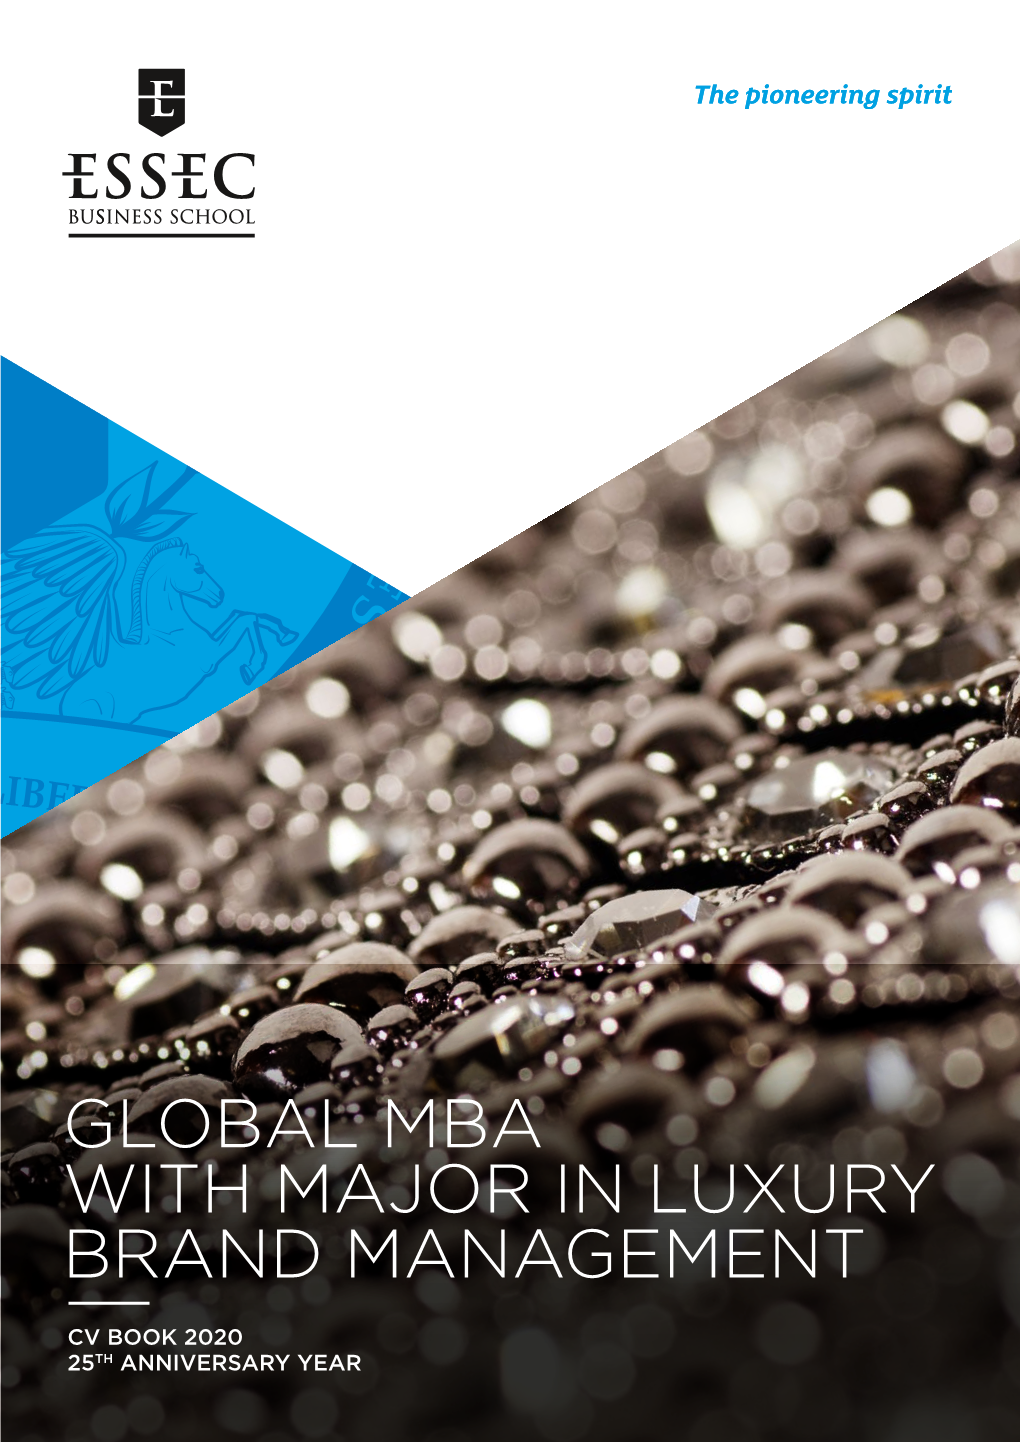 Global Mba with Major in Luxury Brand Management